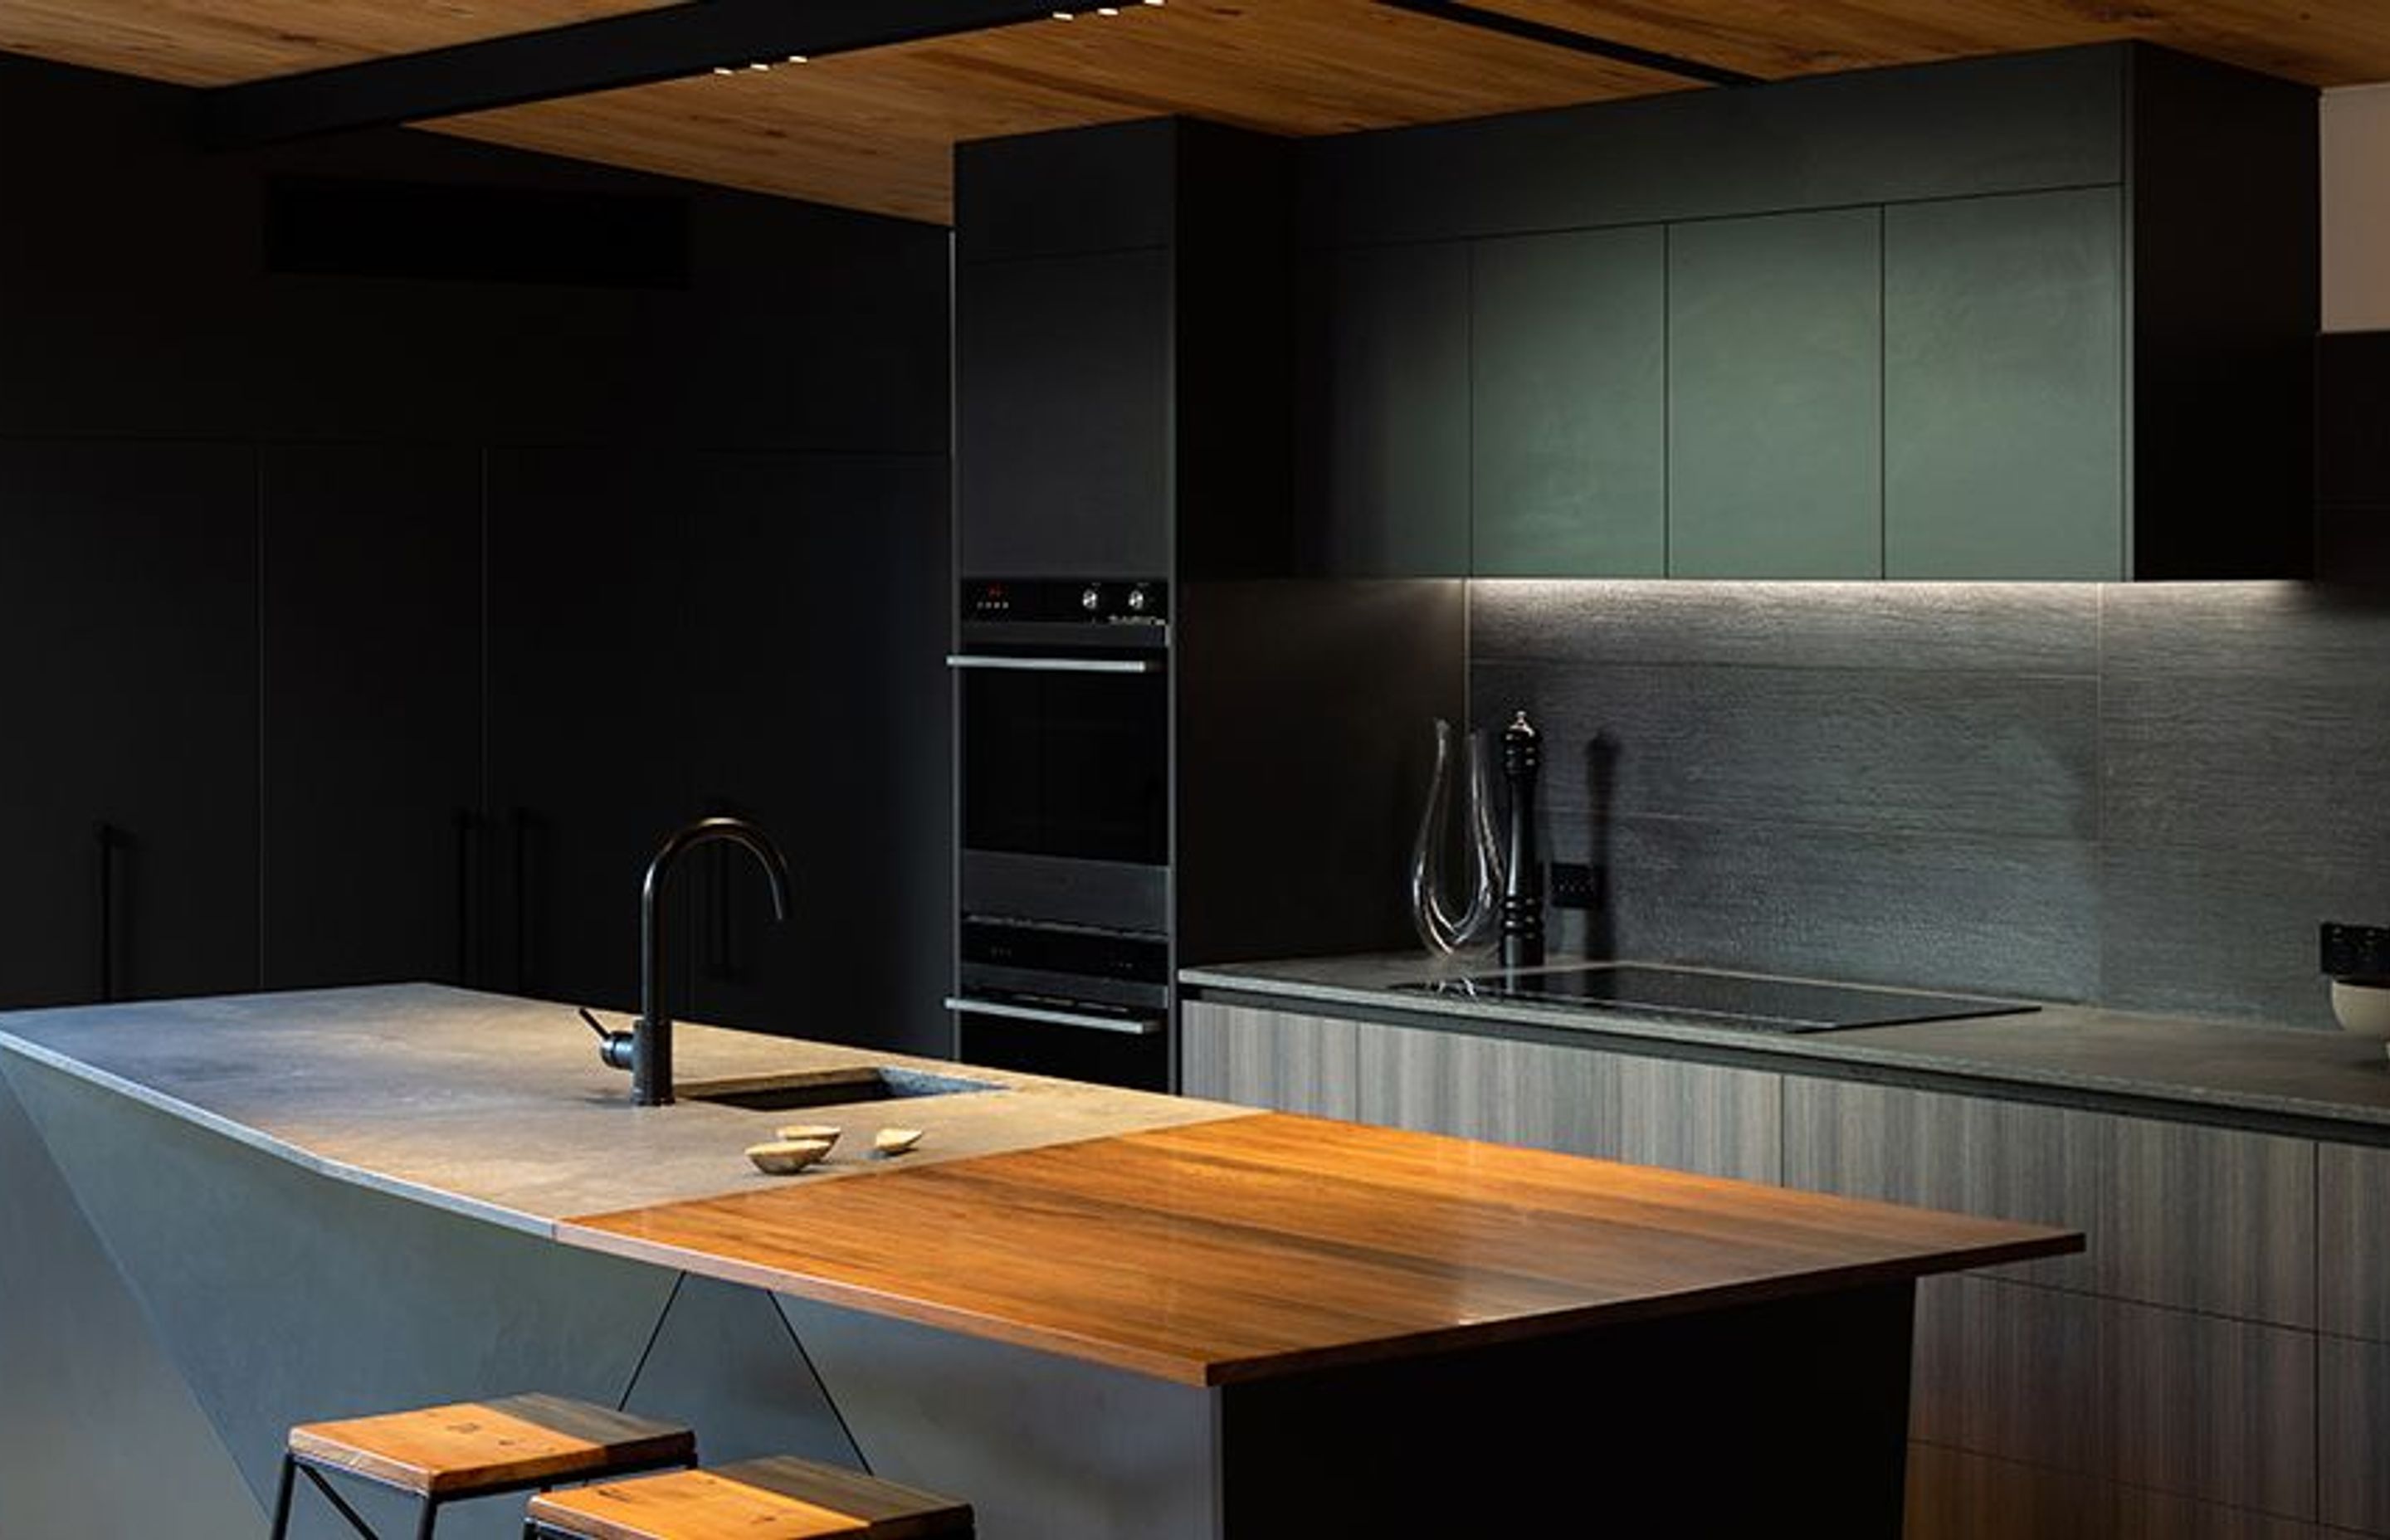 This stunning kitchen has a swamp rimu slab nestled into a rugged concrete Caesarstone benchtop by Laminex  Custom cabinetry by Prime Panels in dark grey complete the look.